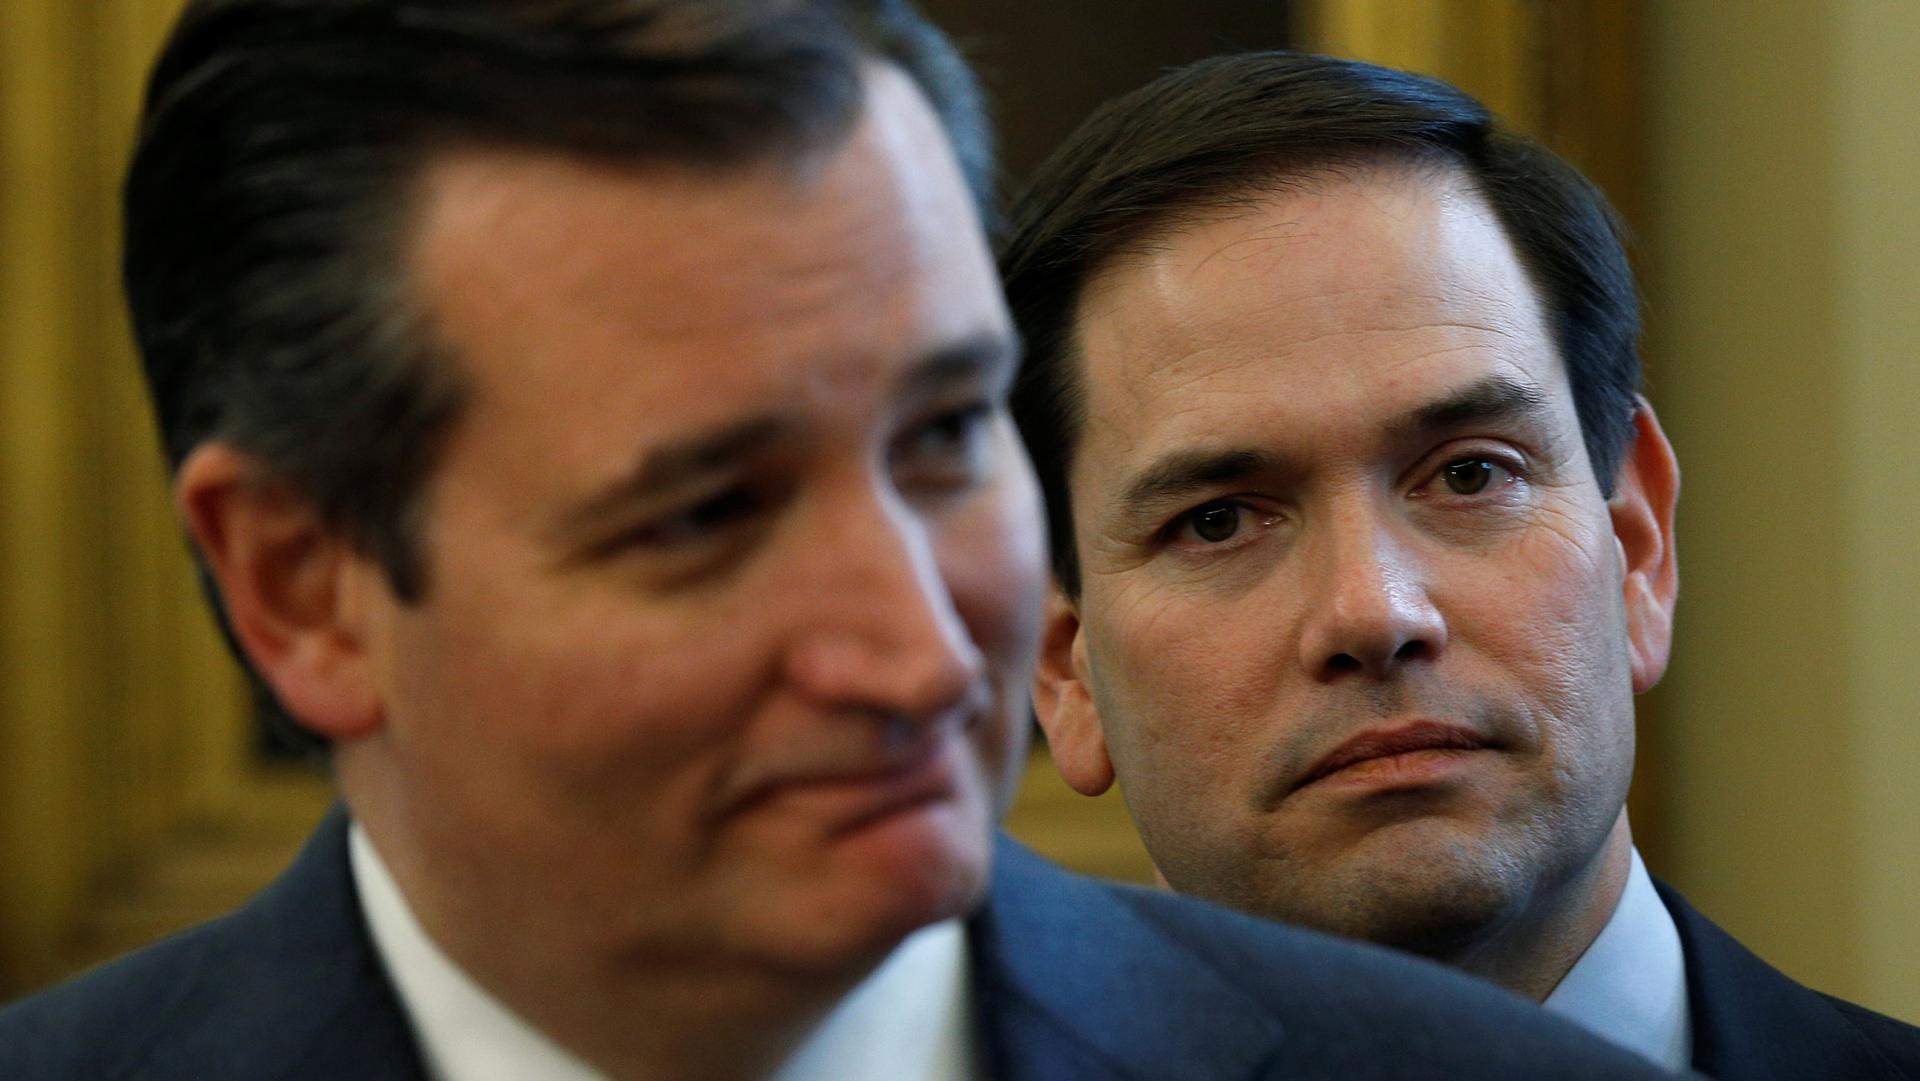 US Senators Ted Cruz and Marco Rubio are shown standing near each other and wearing dark suits.